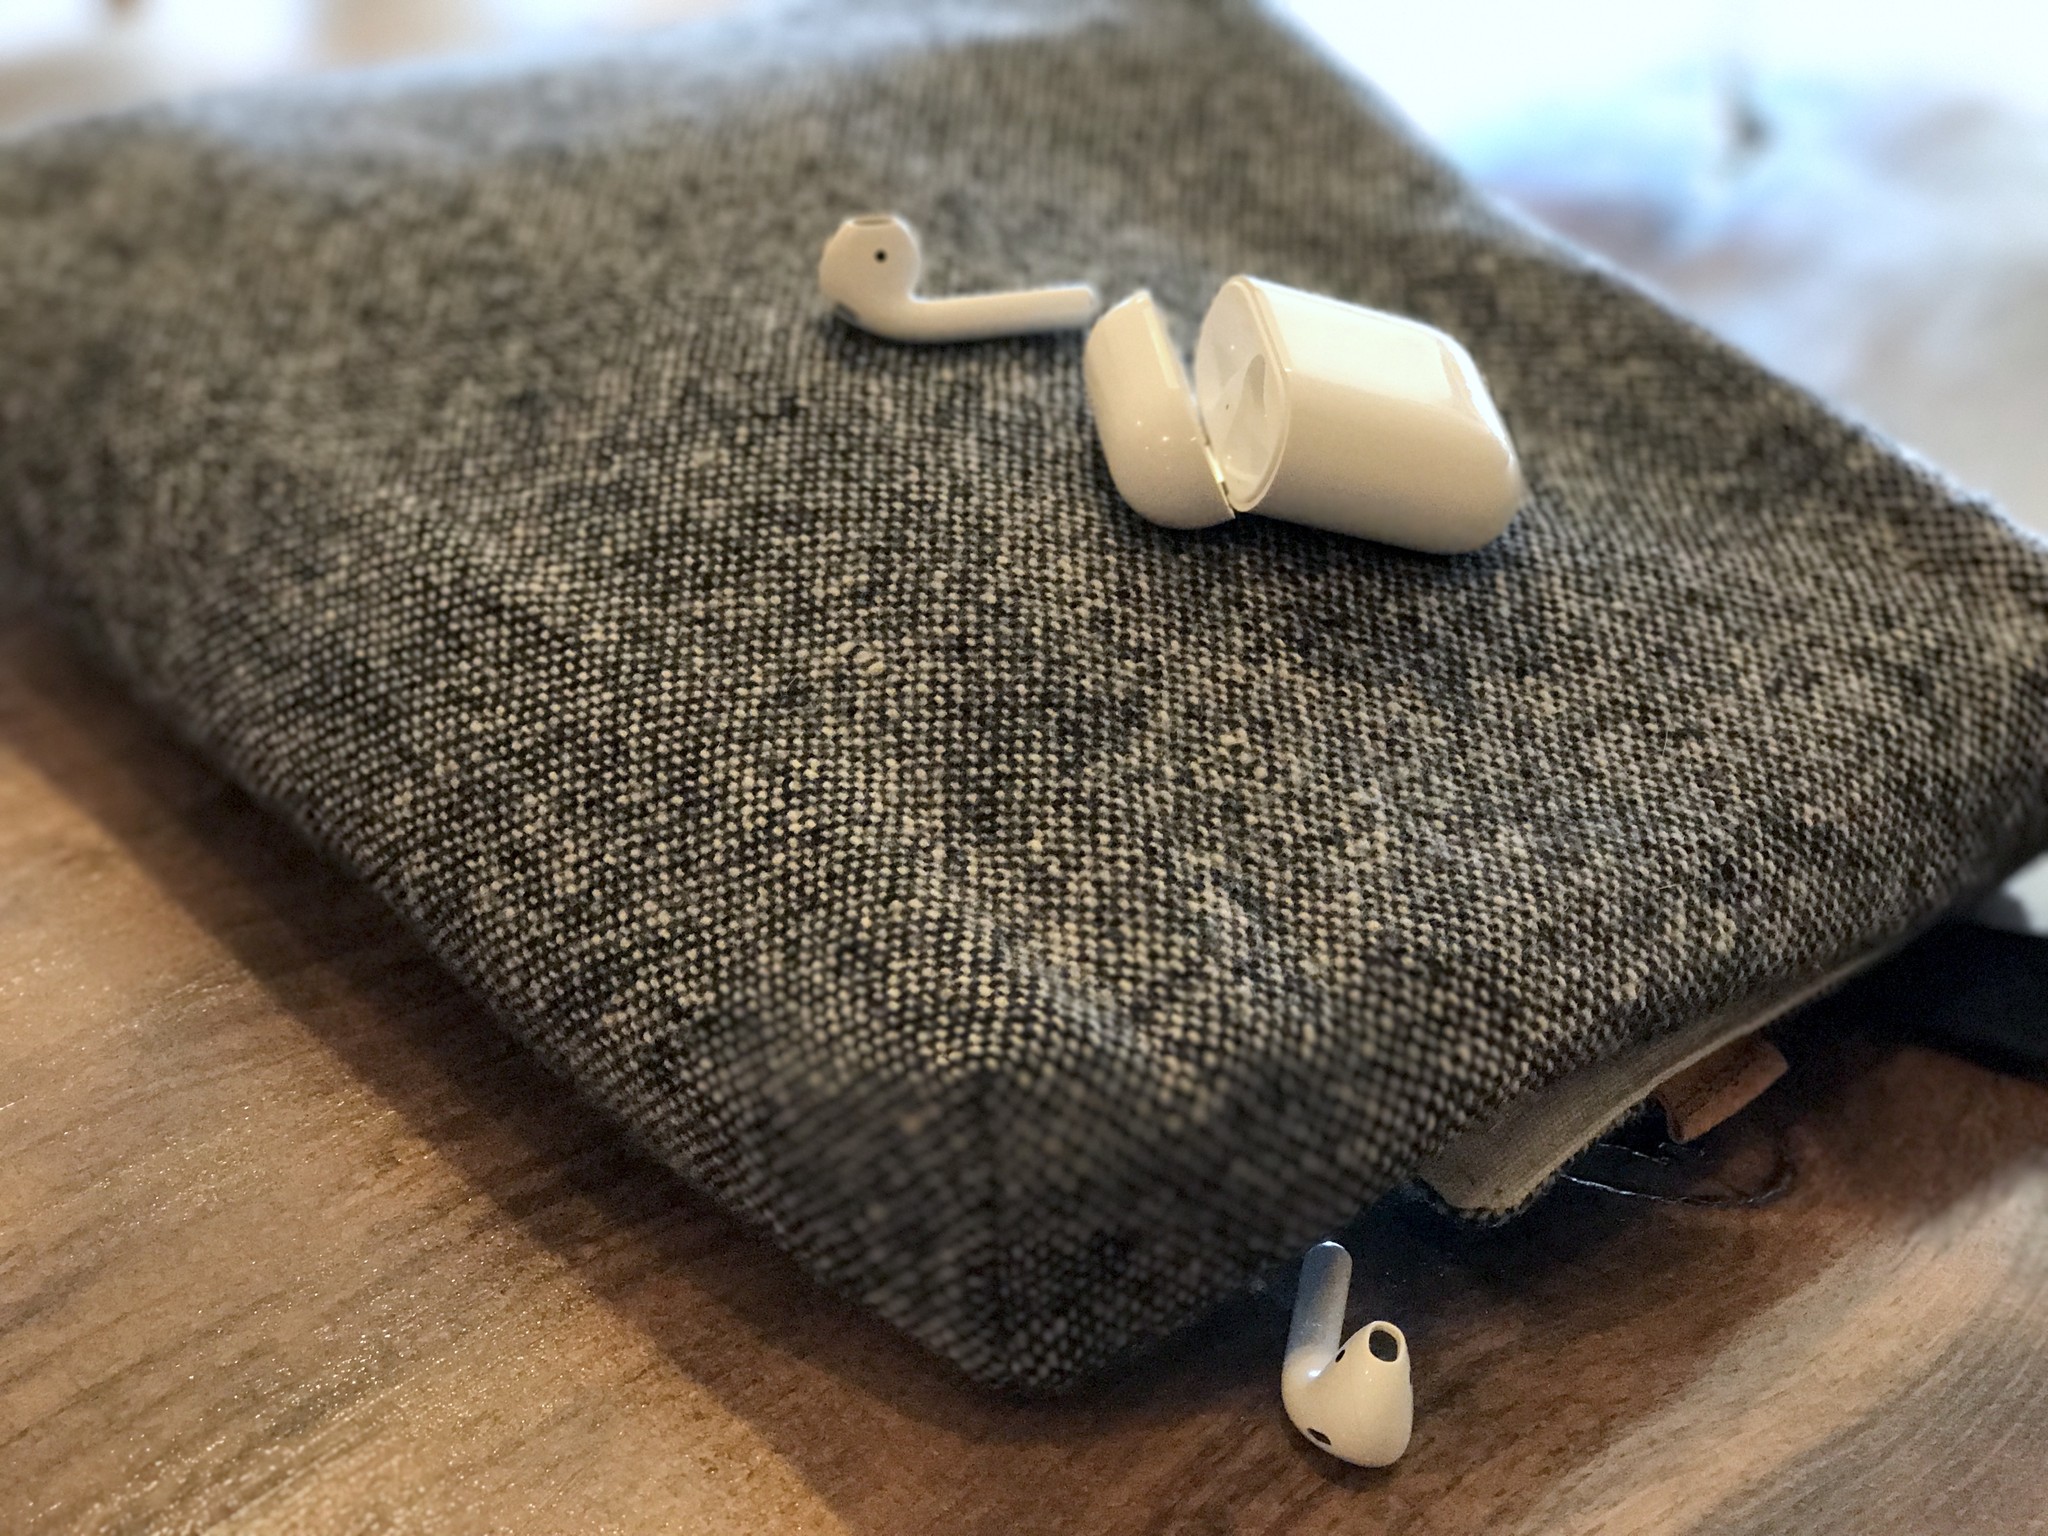 How to find lost AirPods with the Find My iPhone app iMore